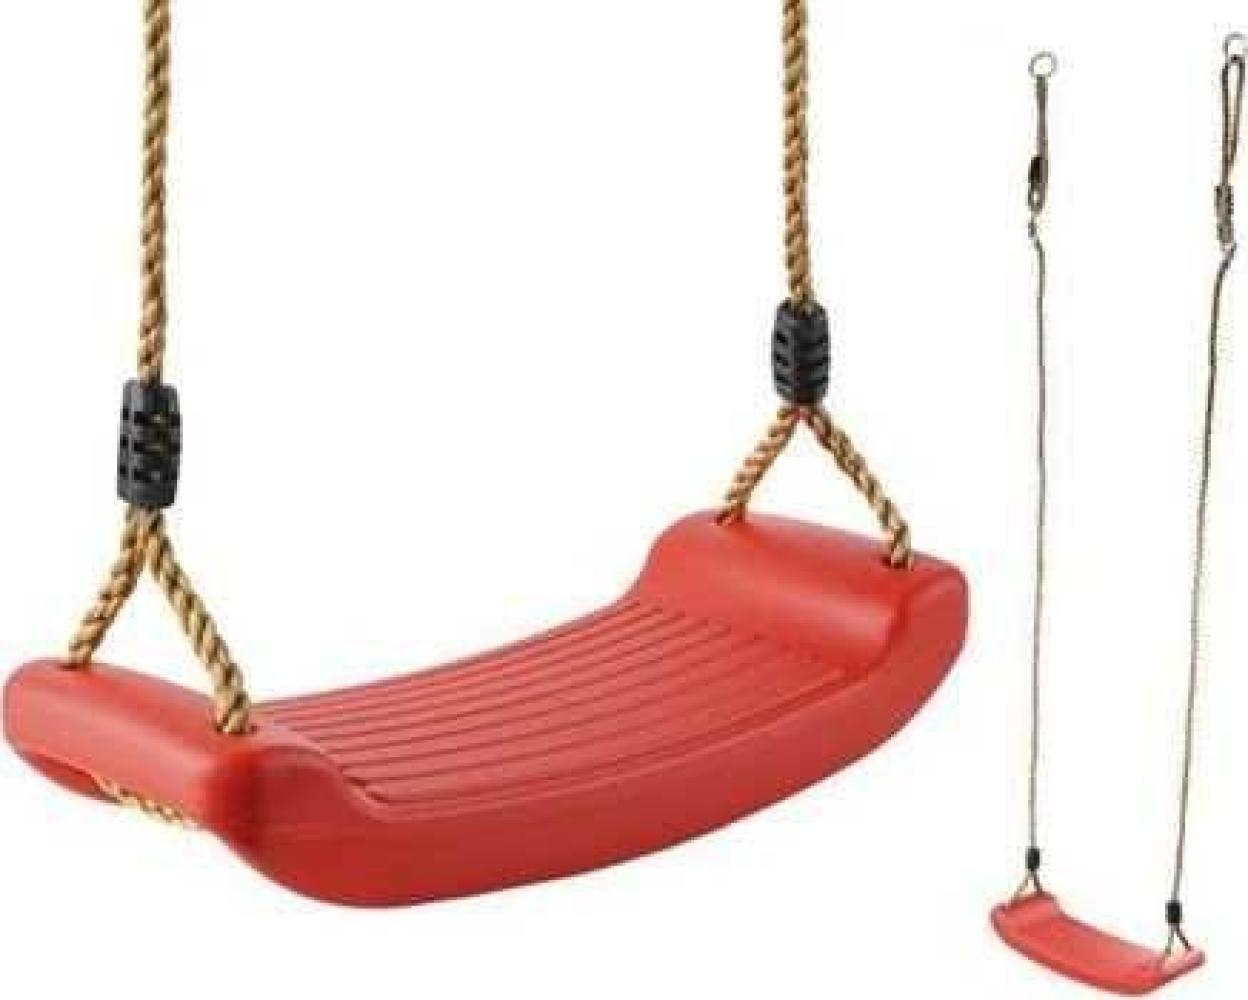 Swing Iso Trade Plastic swing for children toy for 3 years old 175 cm uniw Bild 1